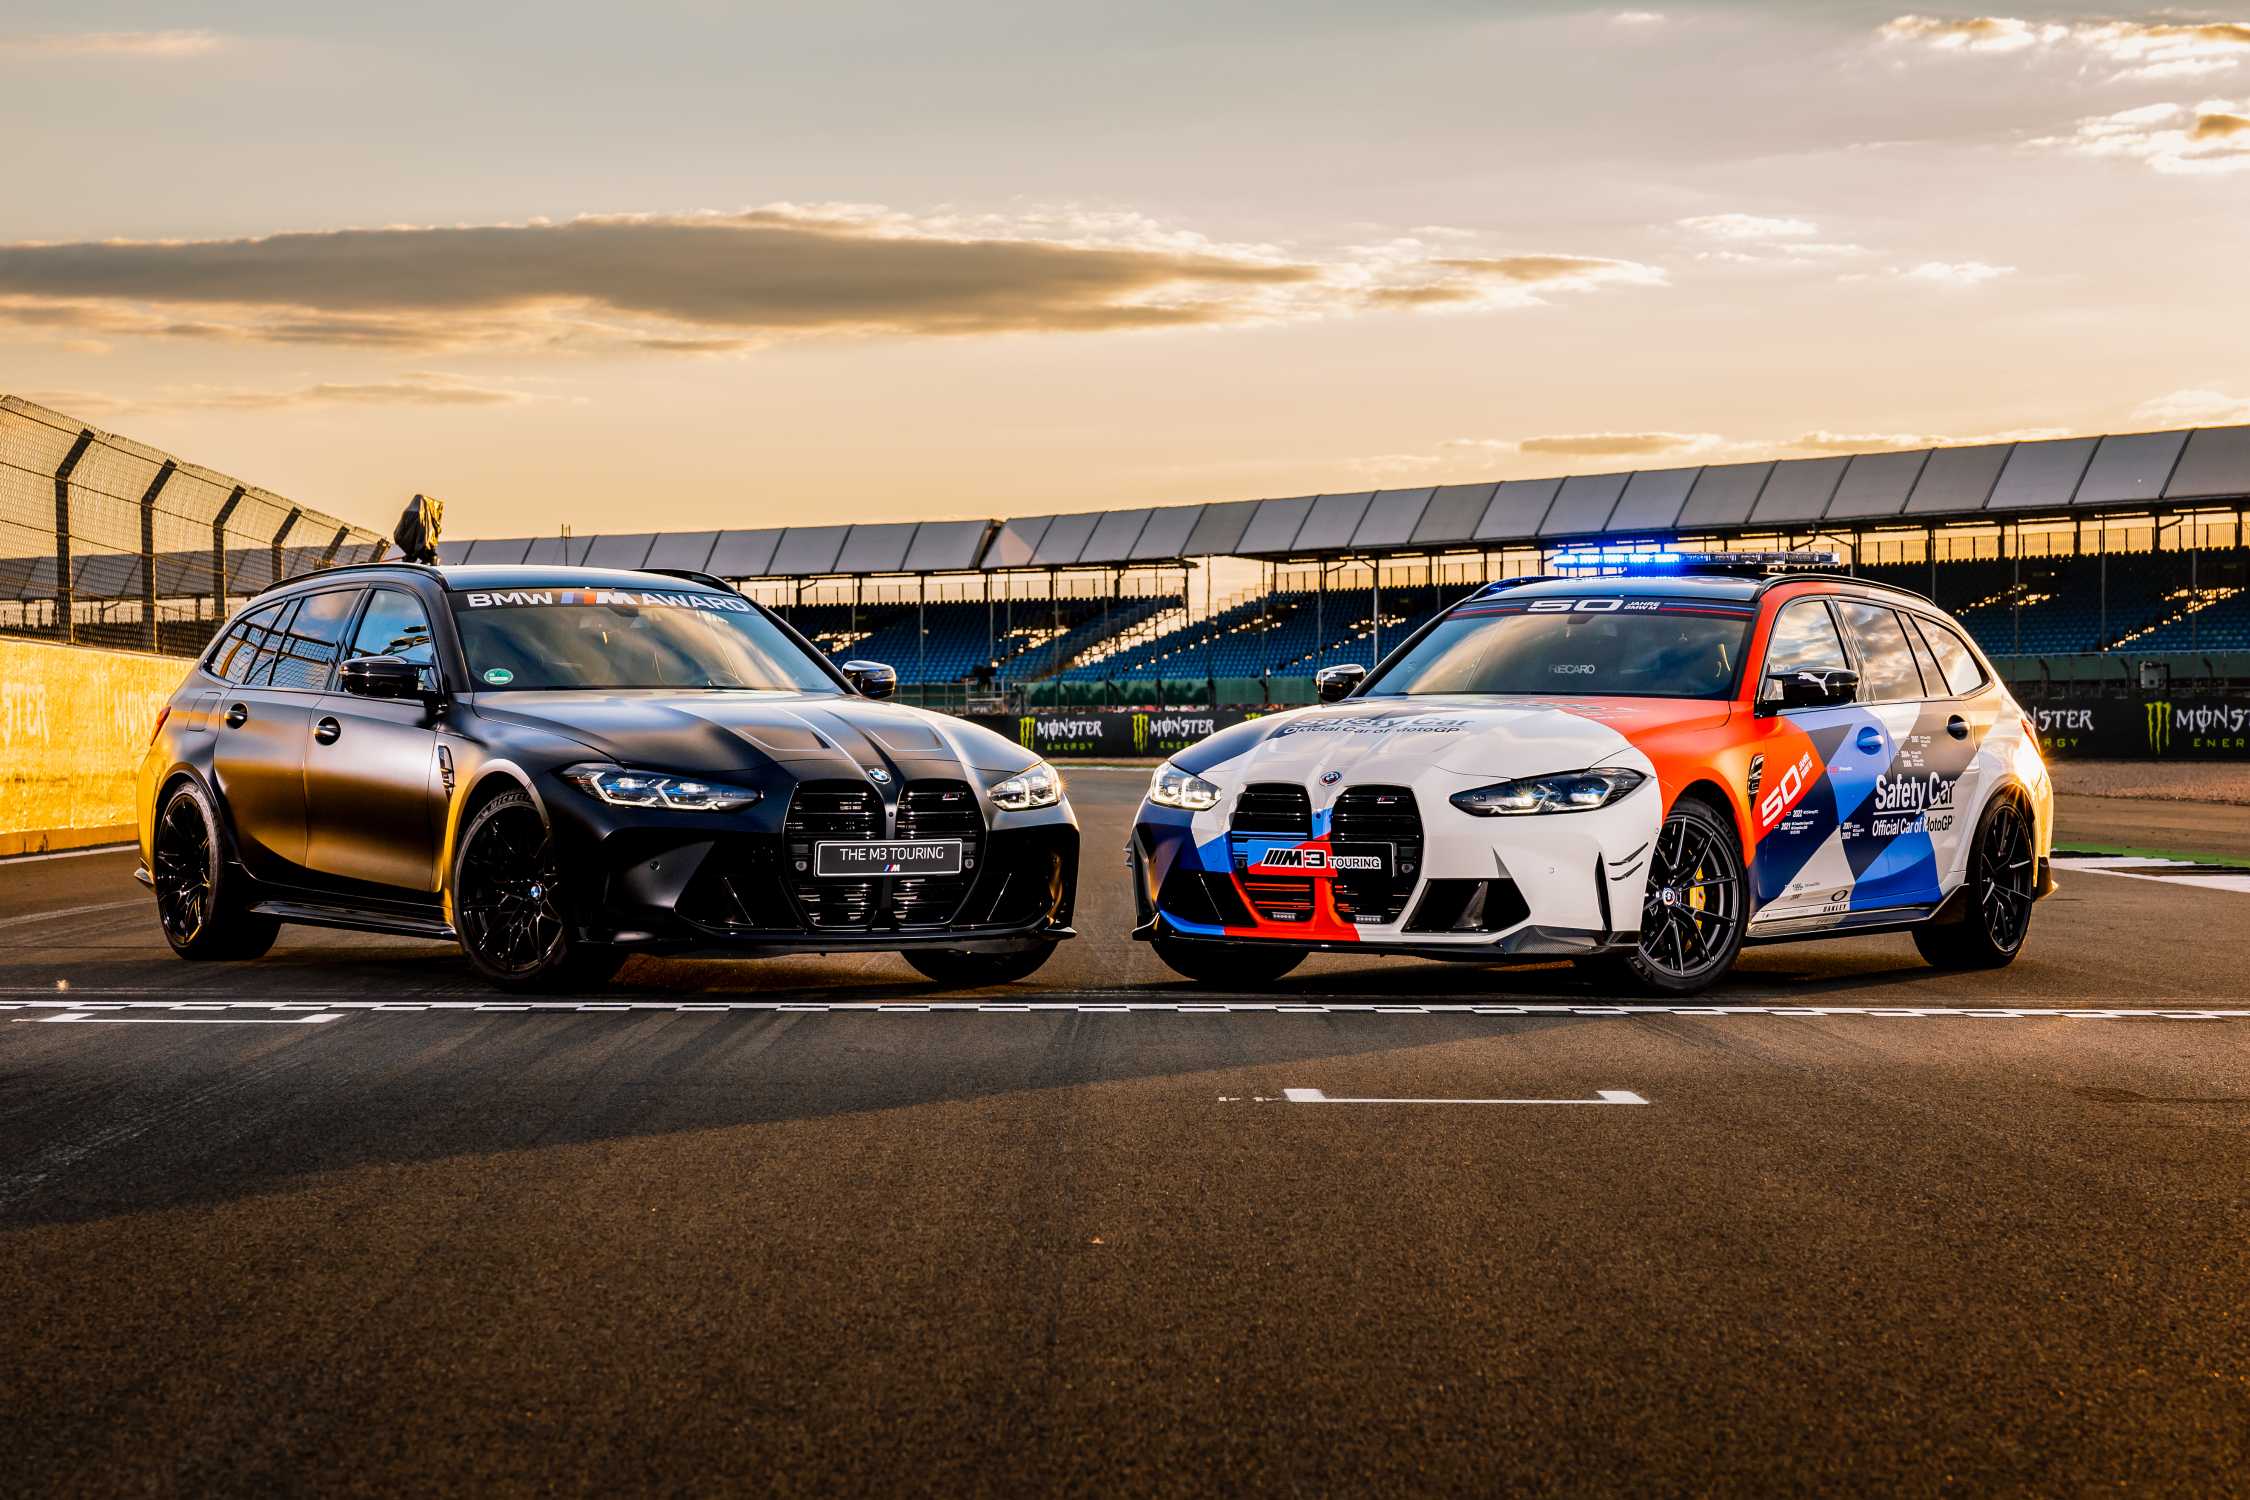 Silverstone (GBR), 5th August 2022. BMW M GmbH, 2022 BMW M Award, MotoGP™. Winner's car BMW M3 Competition Touring with xDrive, BMW M3 Touring MotoGP™ Safety Car.